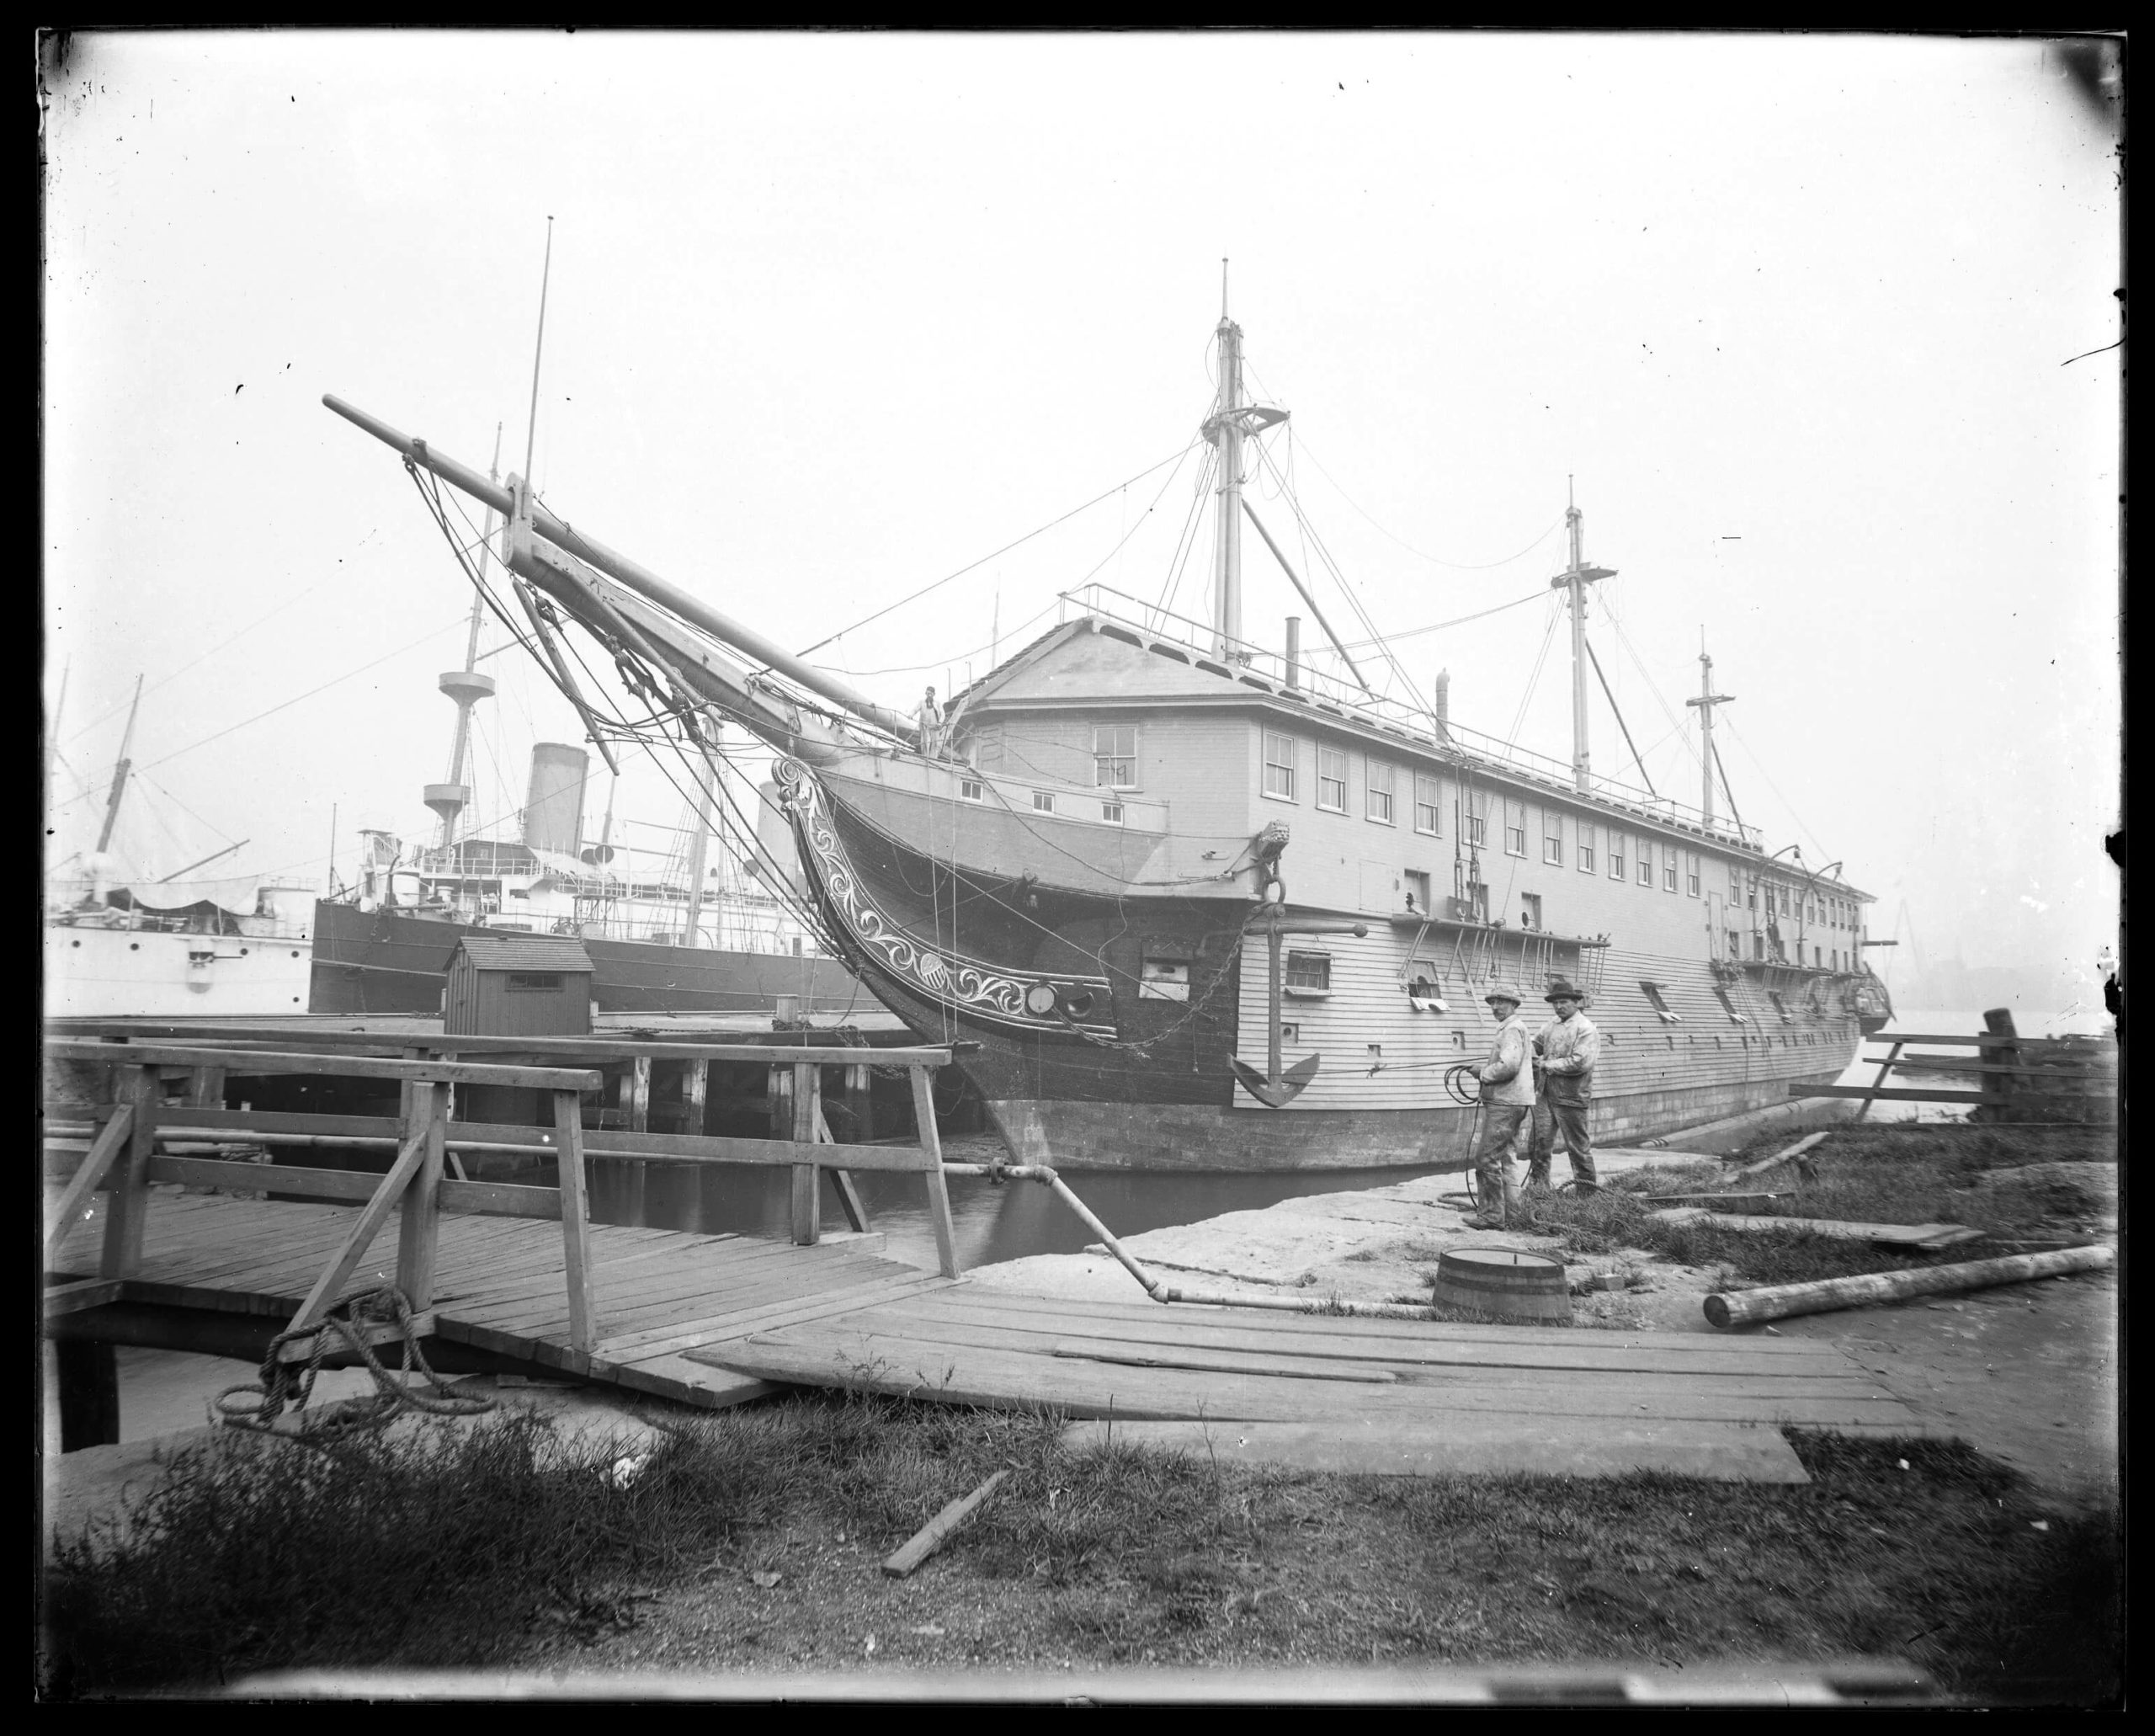 Photographic print, produced from a glass plate negative, showing USS Constitution docked in Boston around 1900. [Commodores Fund Purchase]